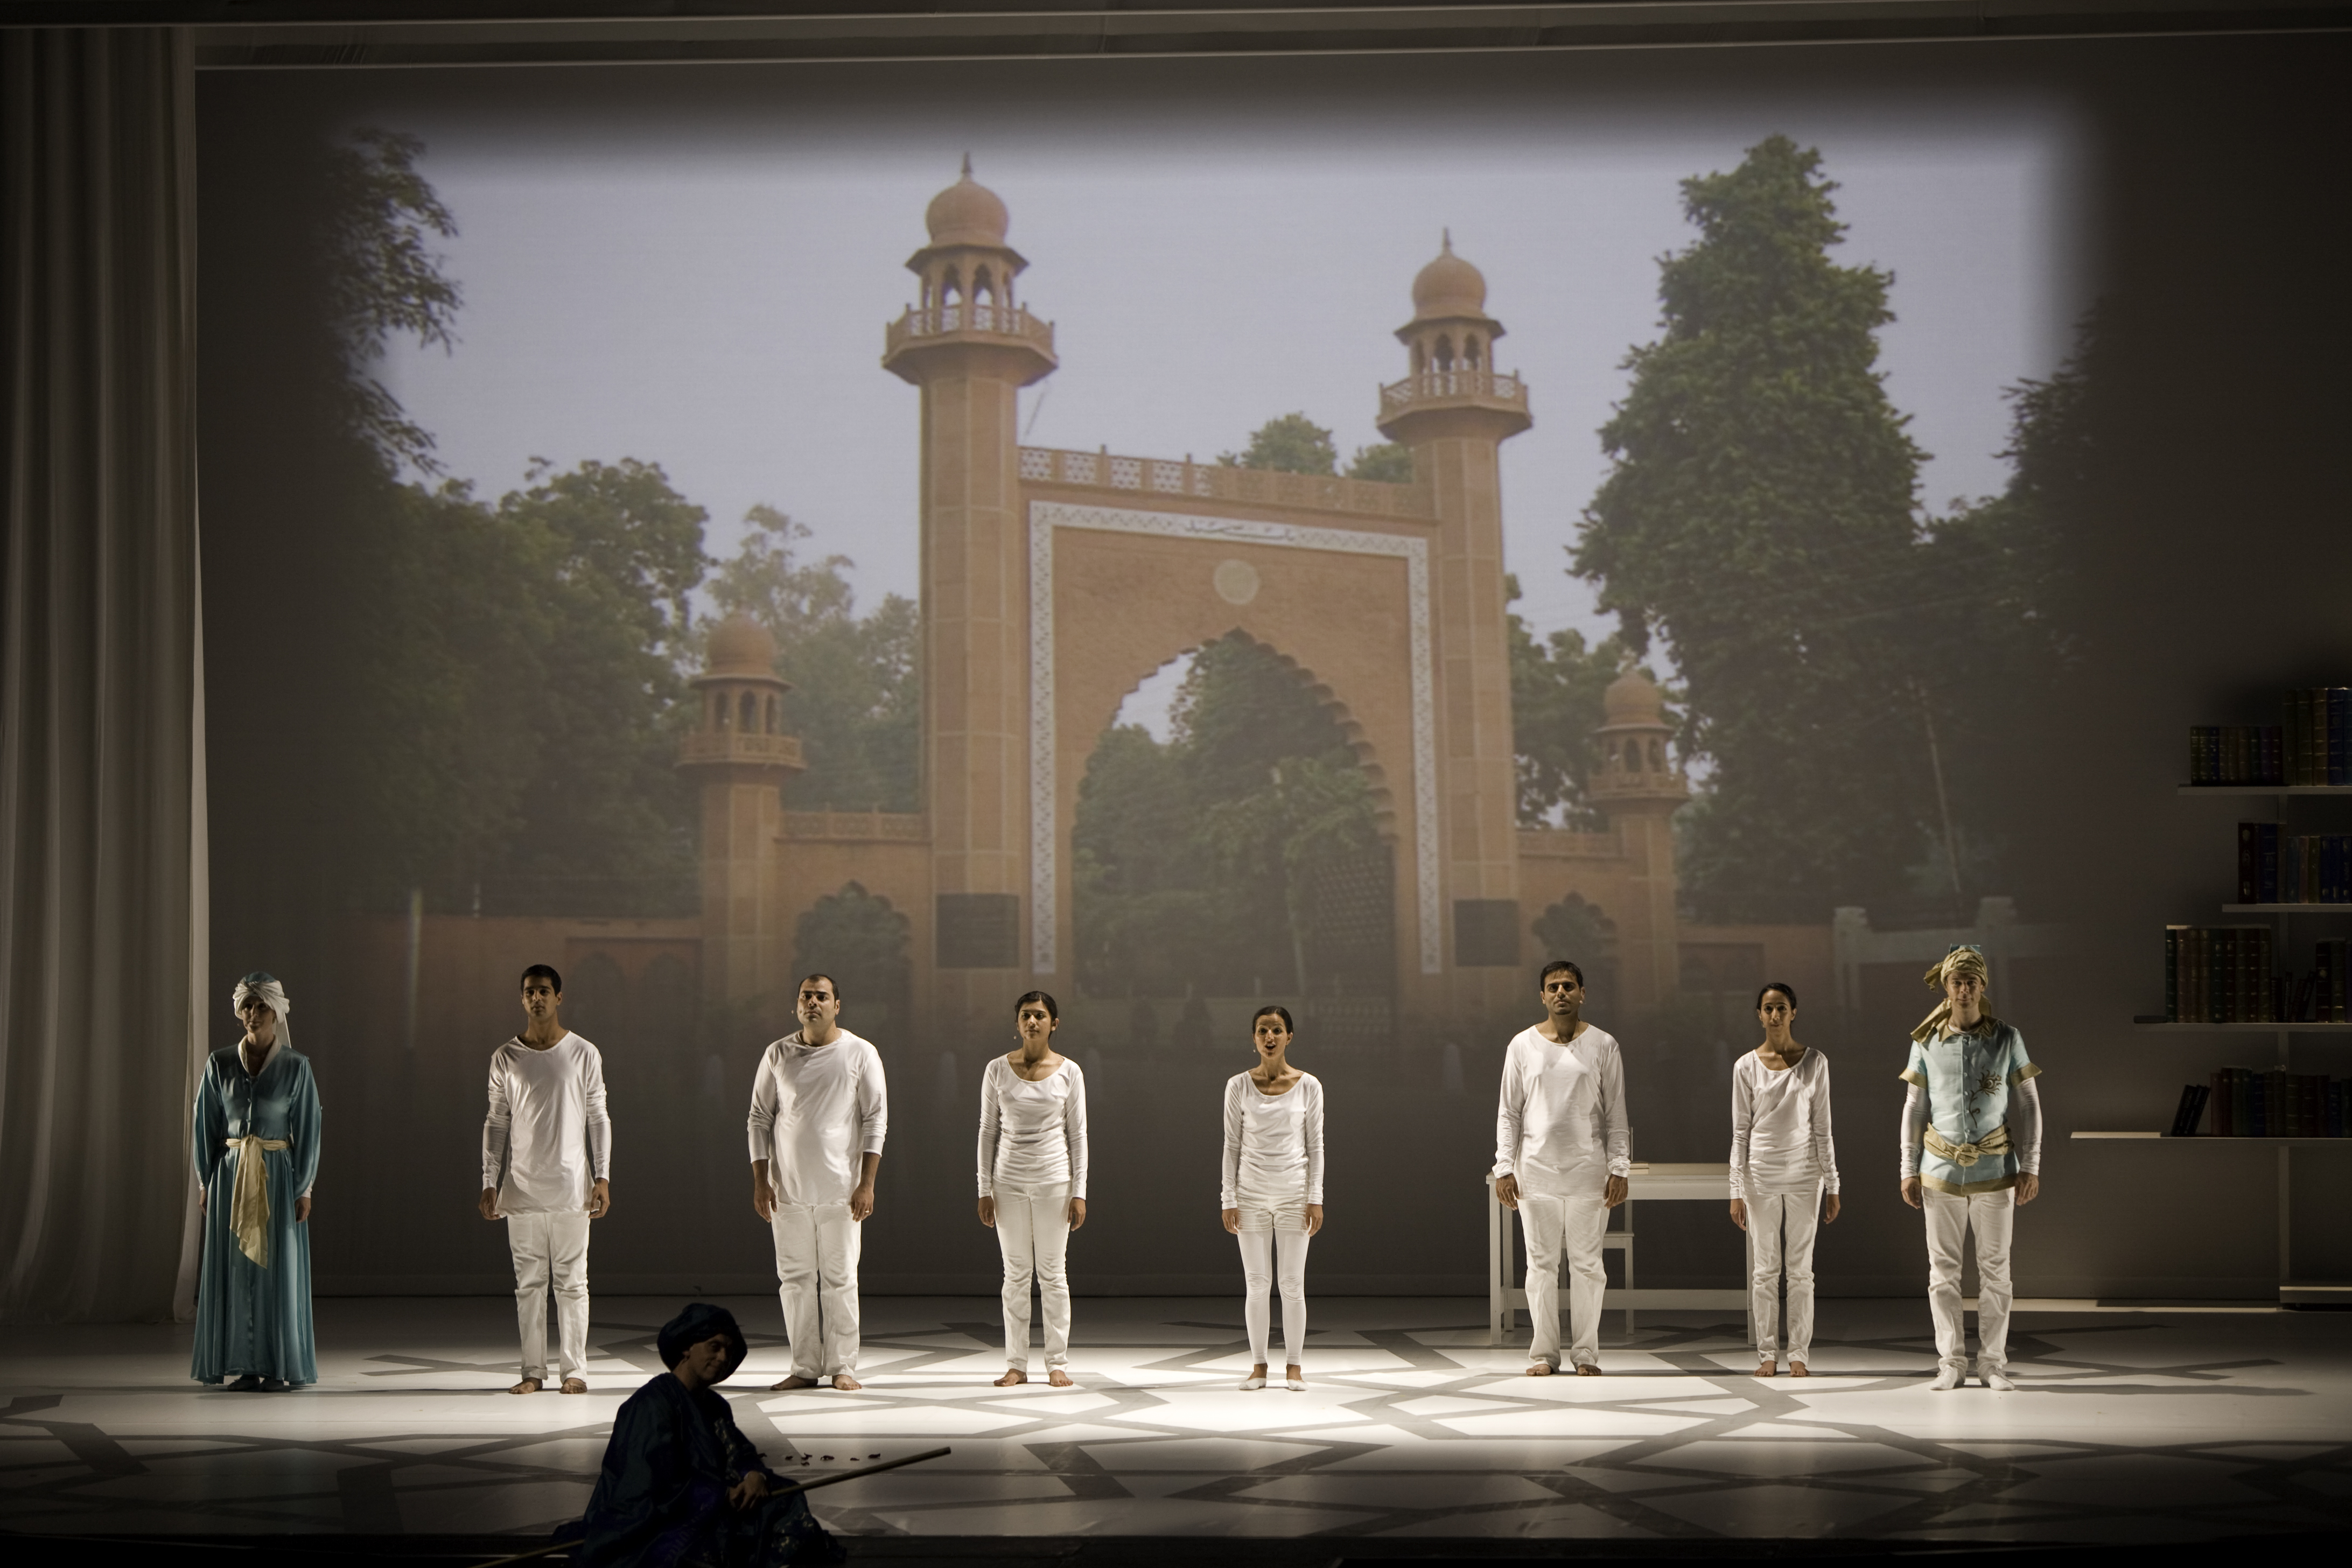 The story of the foundation of Aligarh University is recounted. Photo: Farhez Rayani